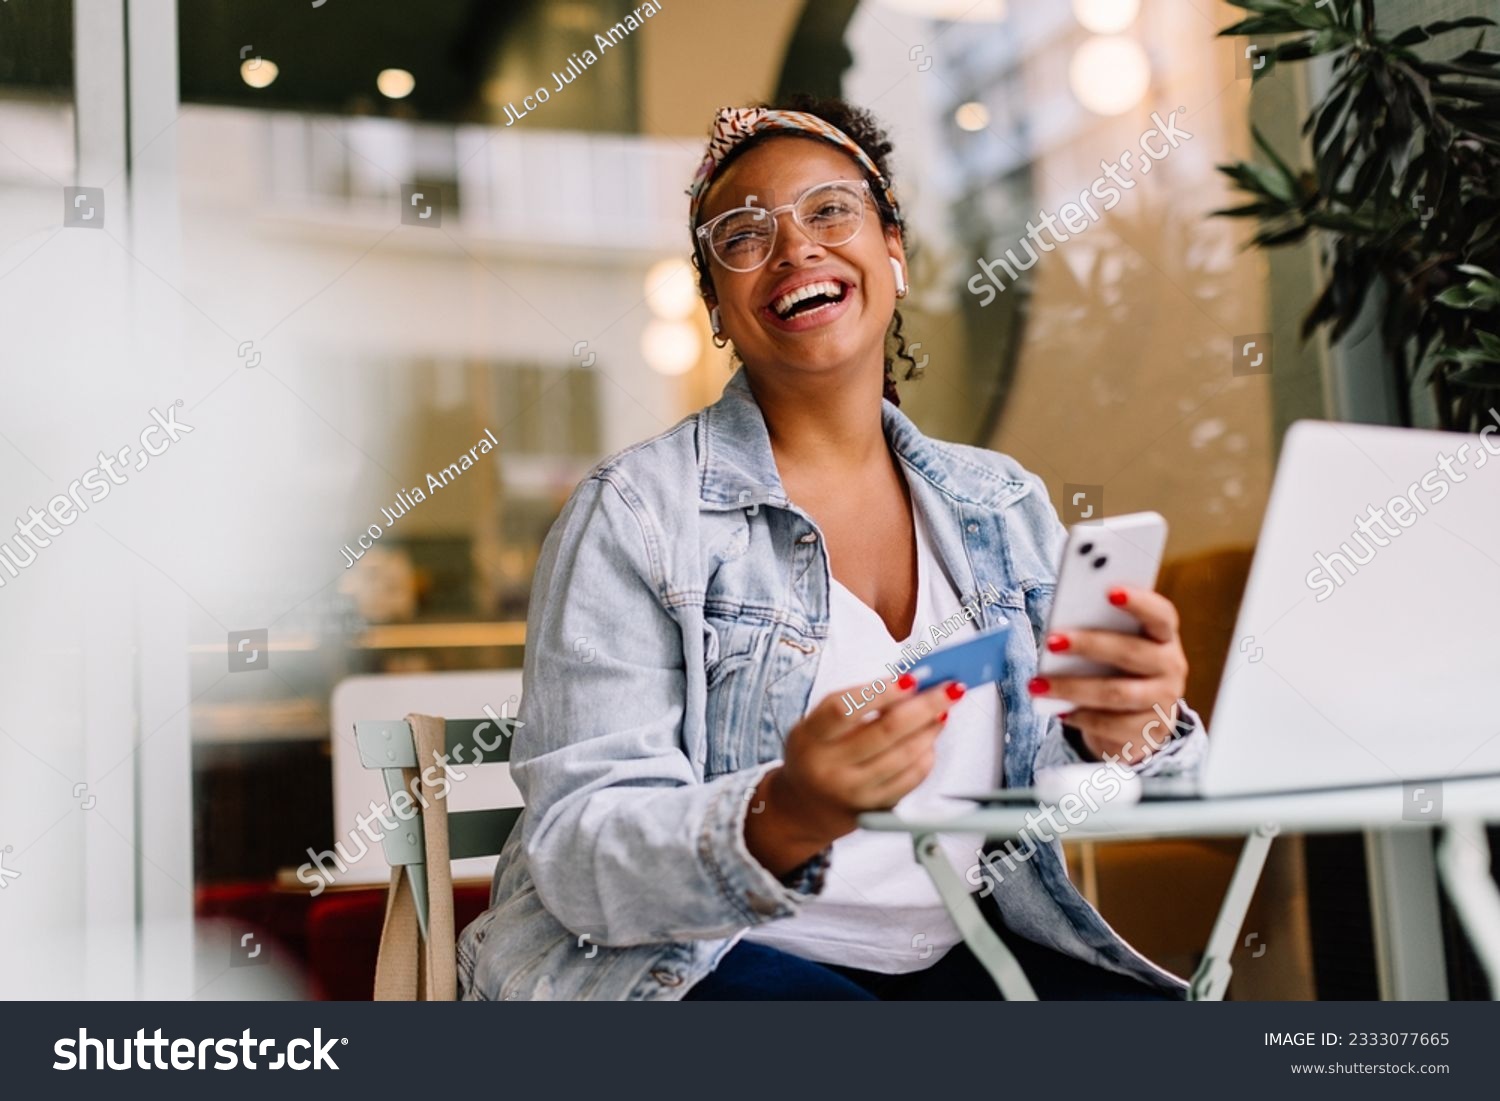 Happy woman sitting in a café and using her smartphone for online shopping, paying with a credit card. Young woman enjoying the convenience of mobile banking and digital transactions. #2333077665